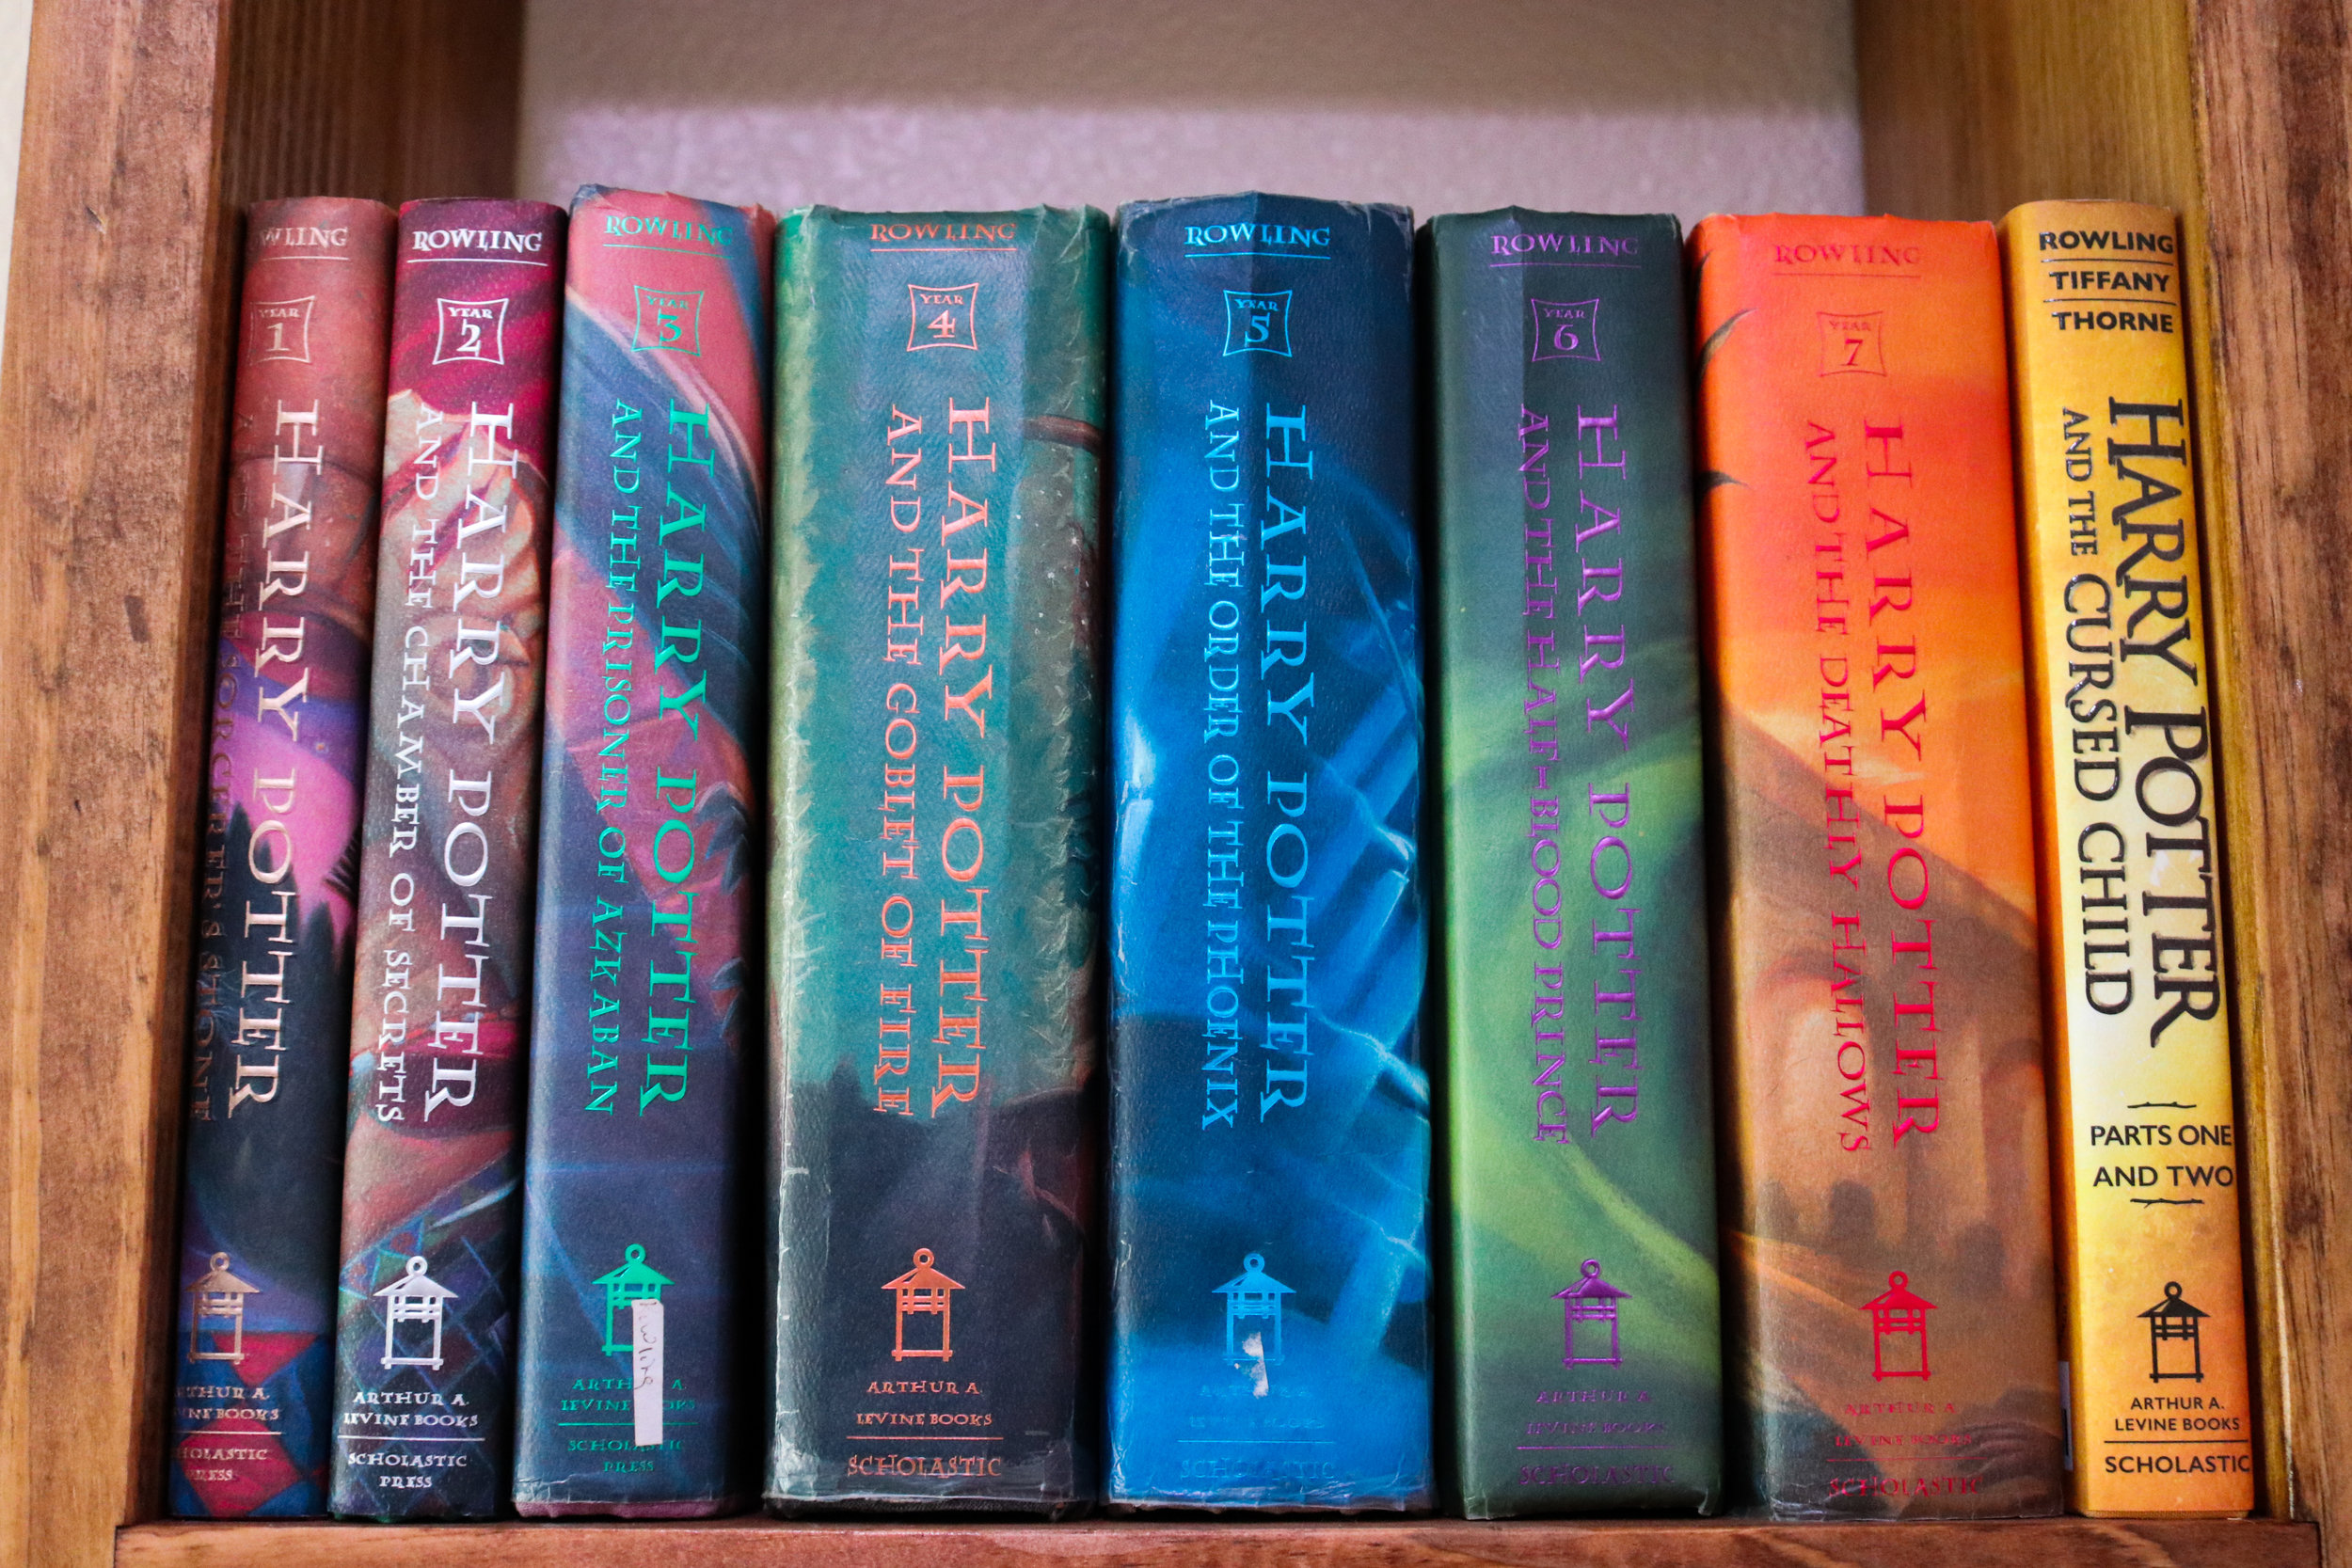  The Harry Potter series now has a permanent home! 